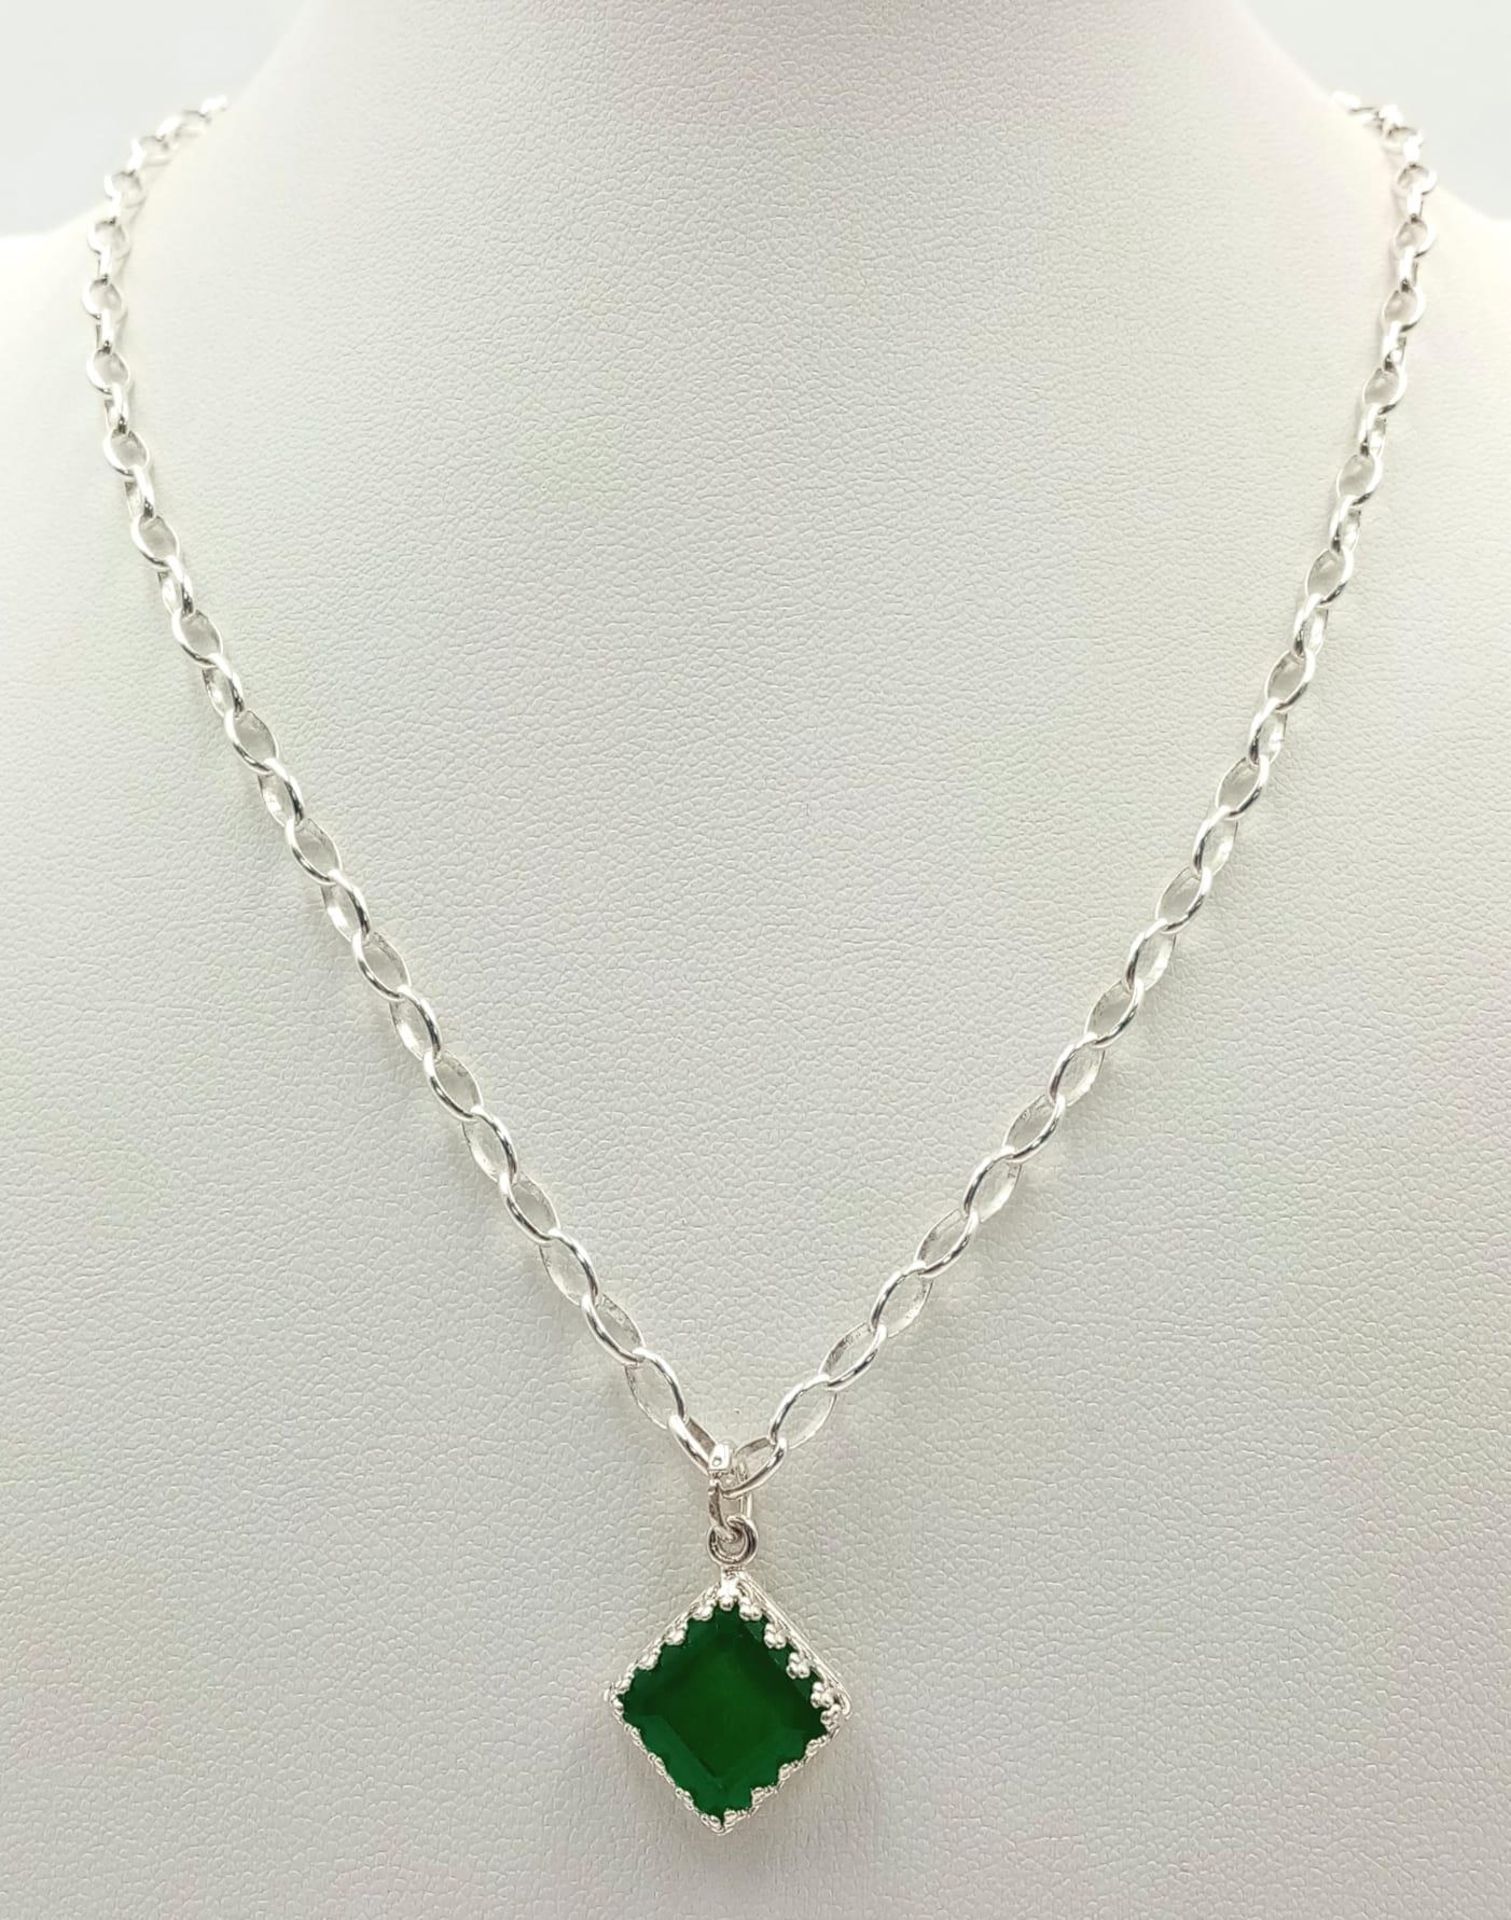 A sterling silver chain necklace with a green stone pendant, chain length: 42 cm, total weight: 6. - Bild 2 aus 6